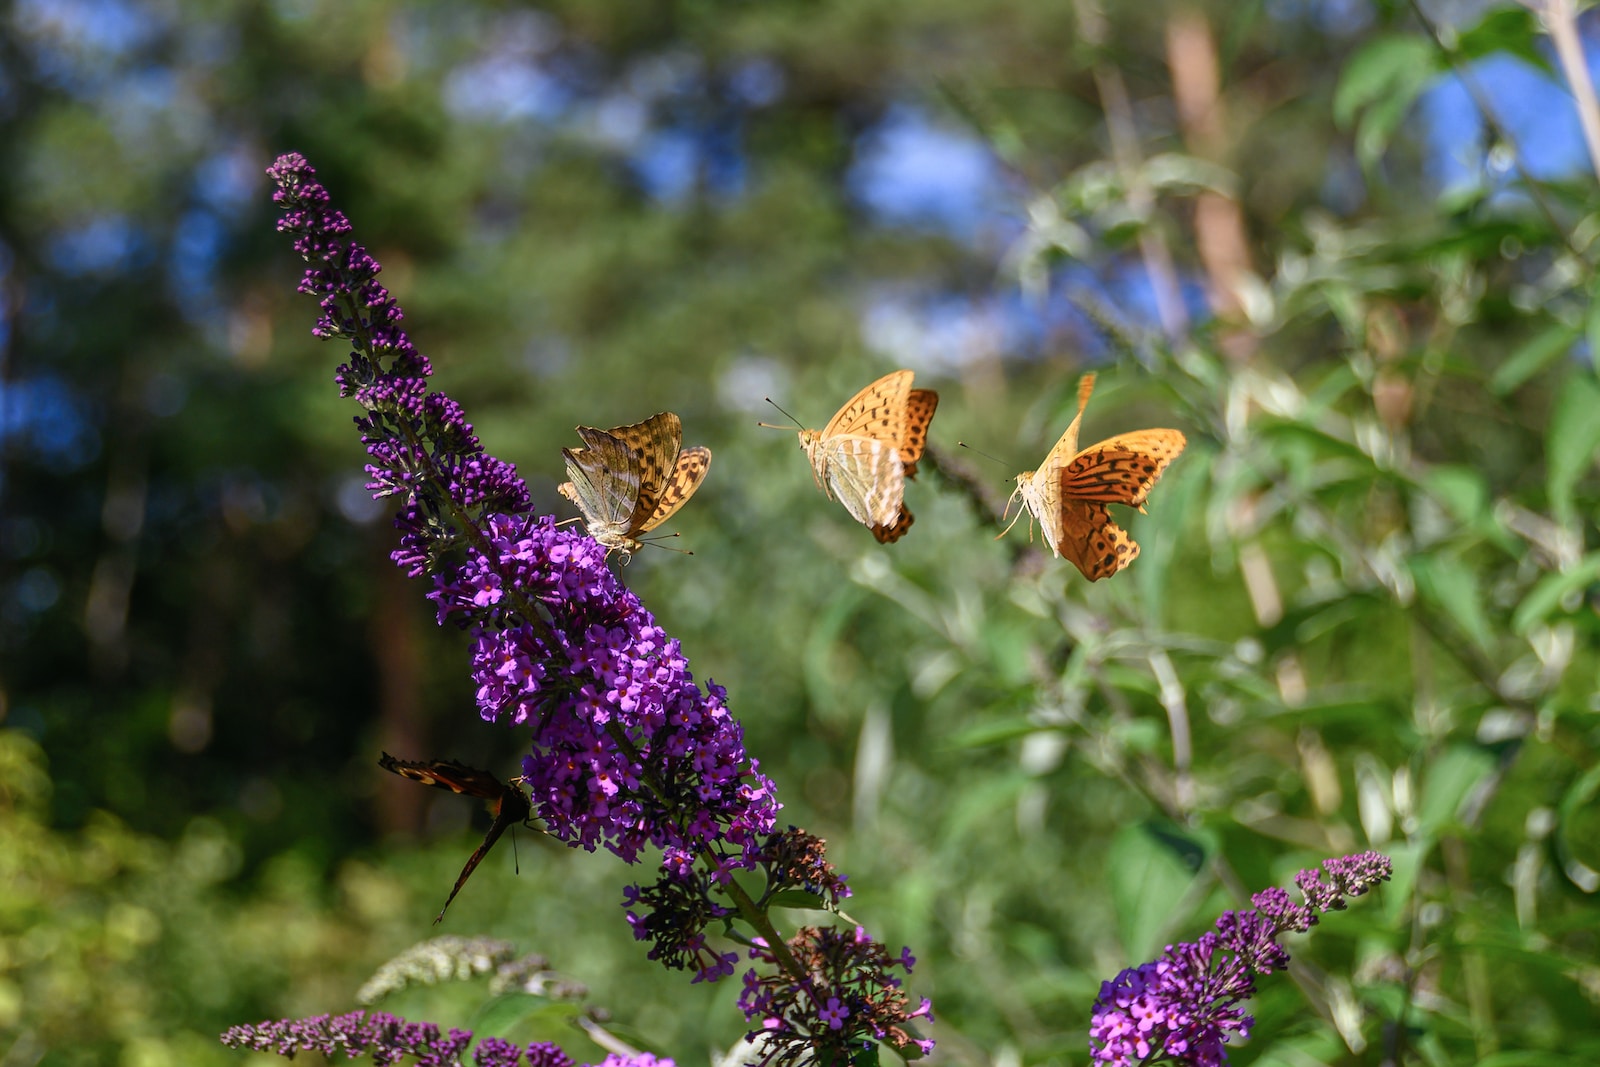 brown butterfly perched on purple flower during daytime